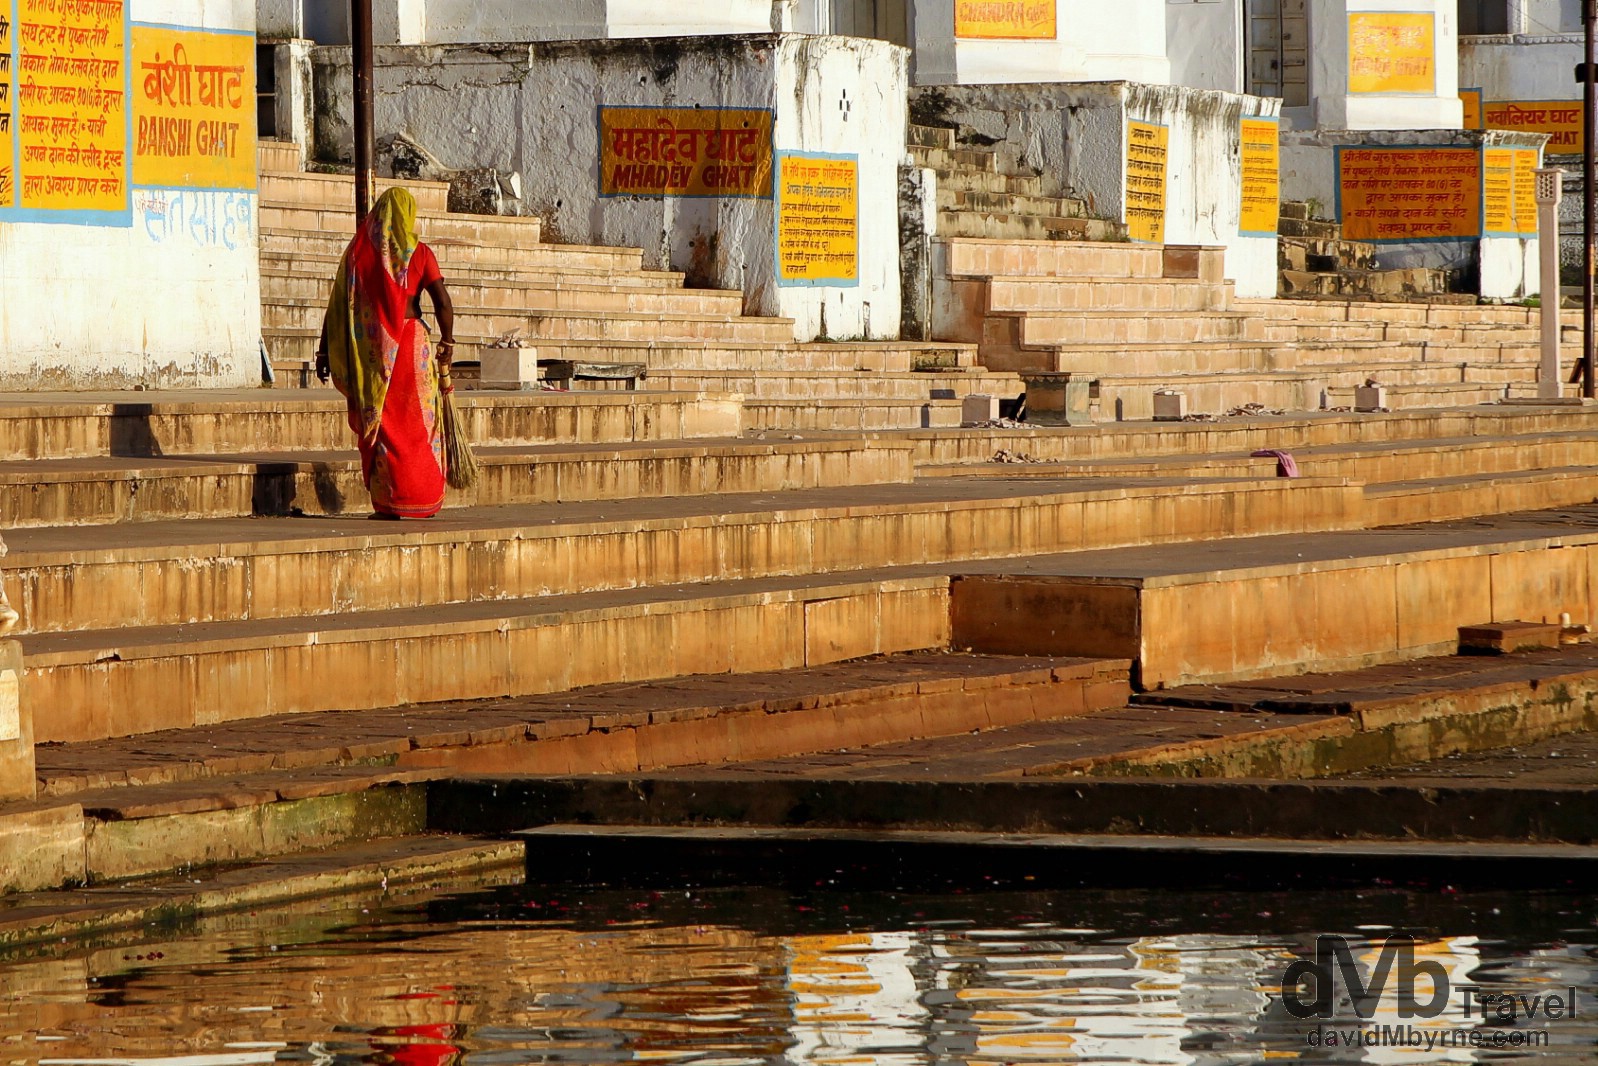 Down on the ghats in Pushkar, Rajasthan, India. October 2nd 2012.